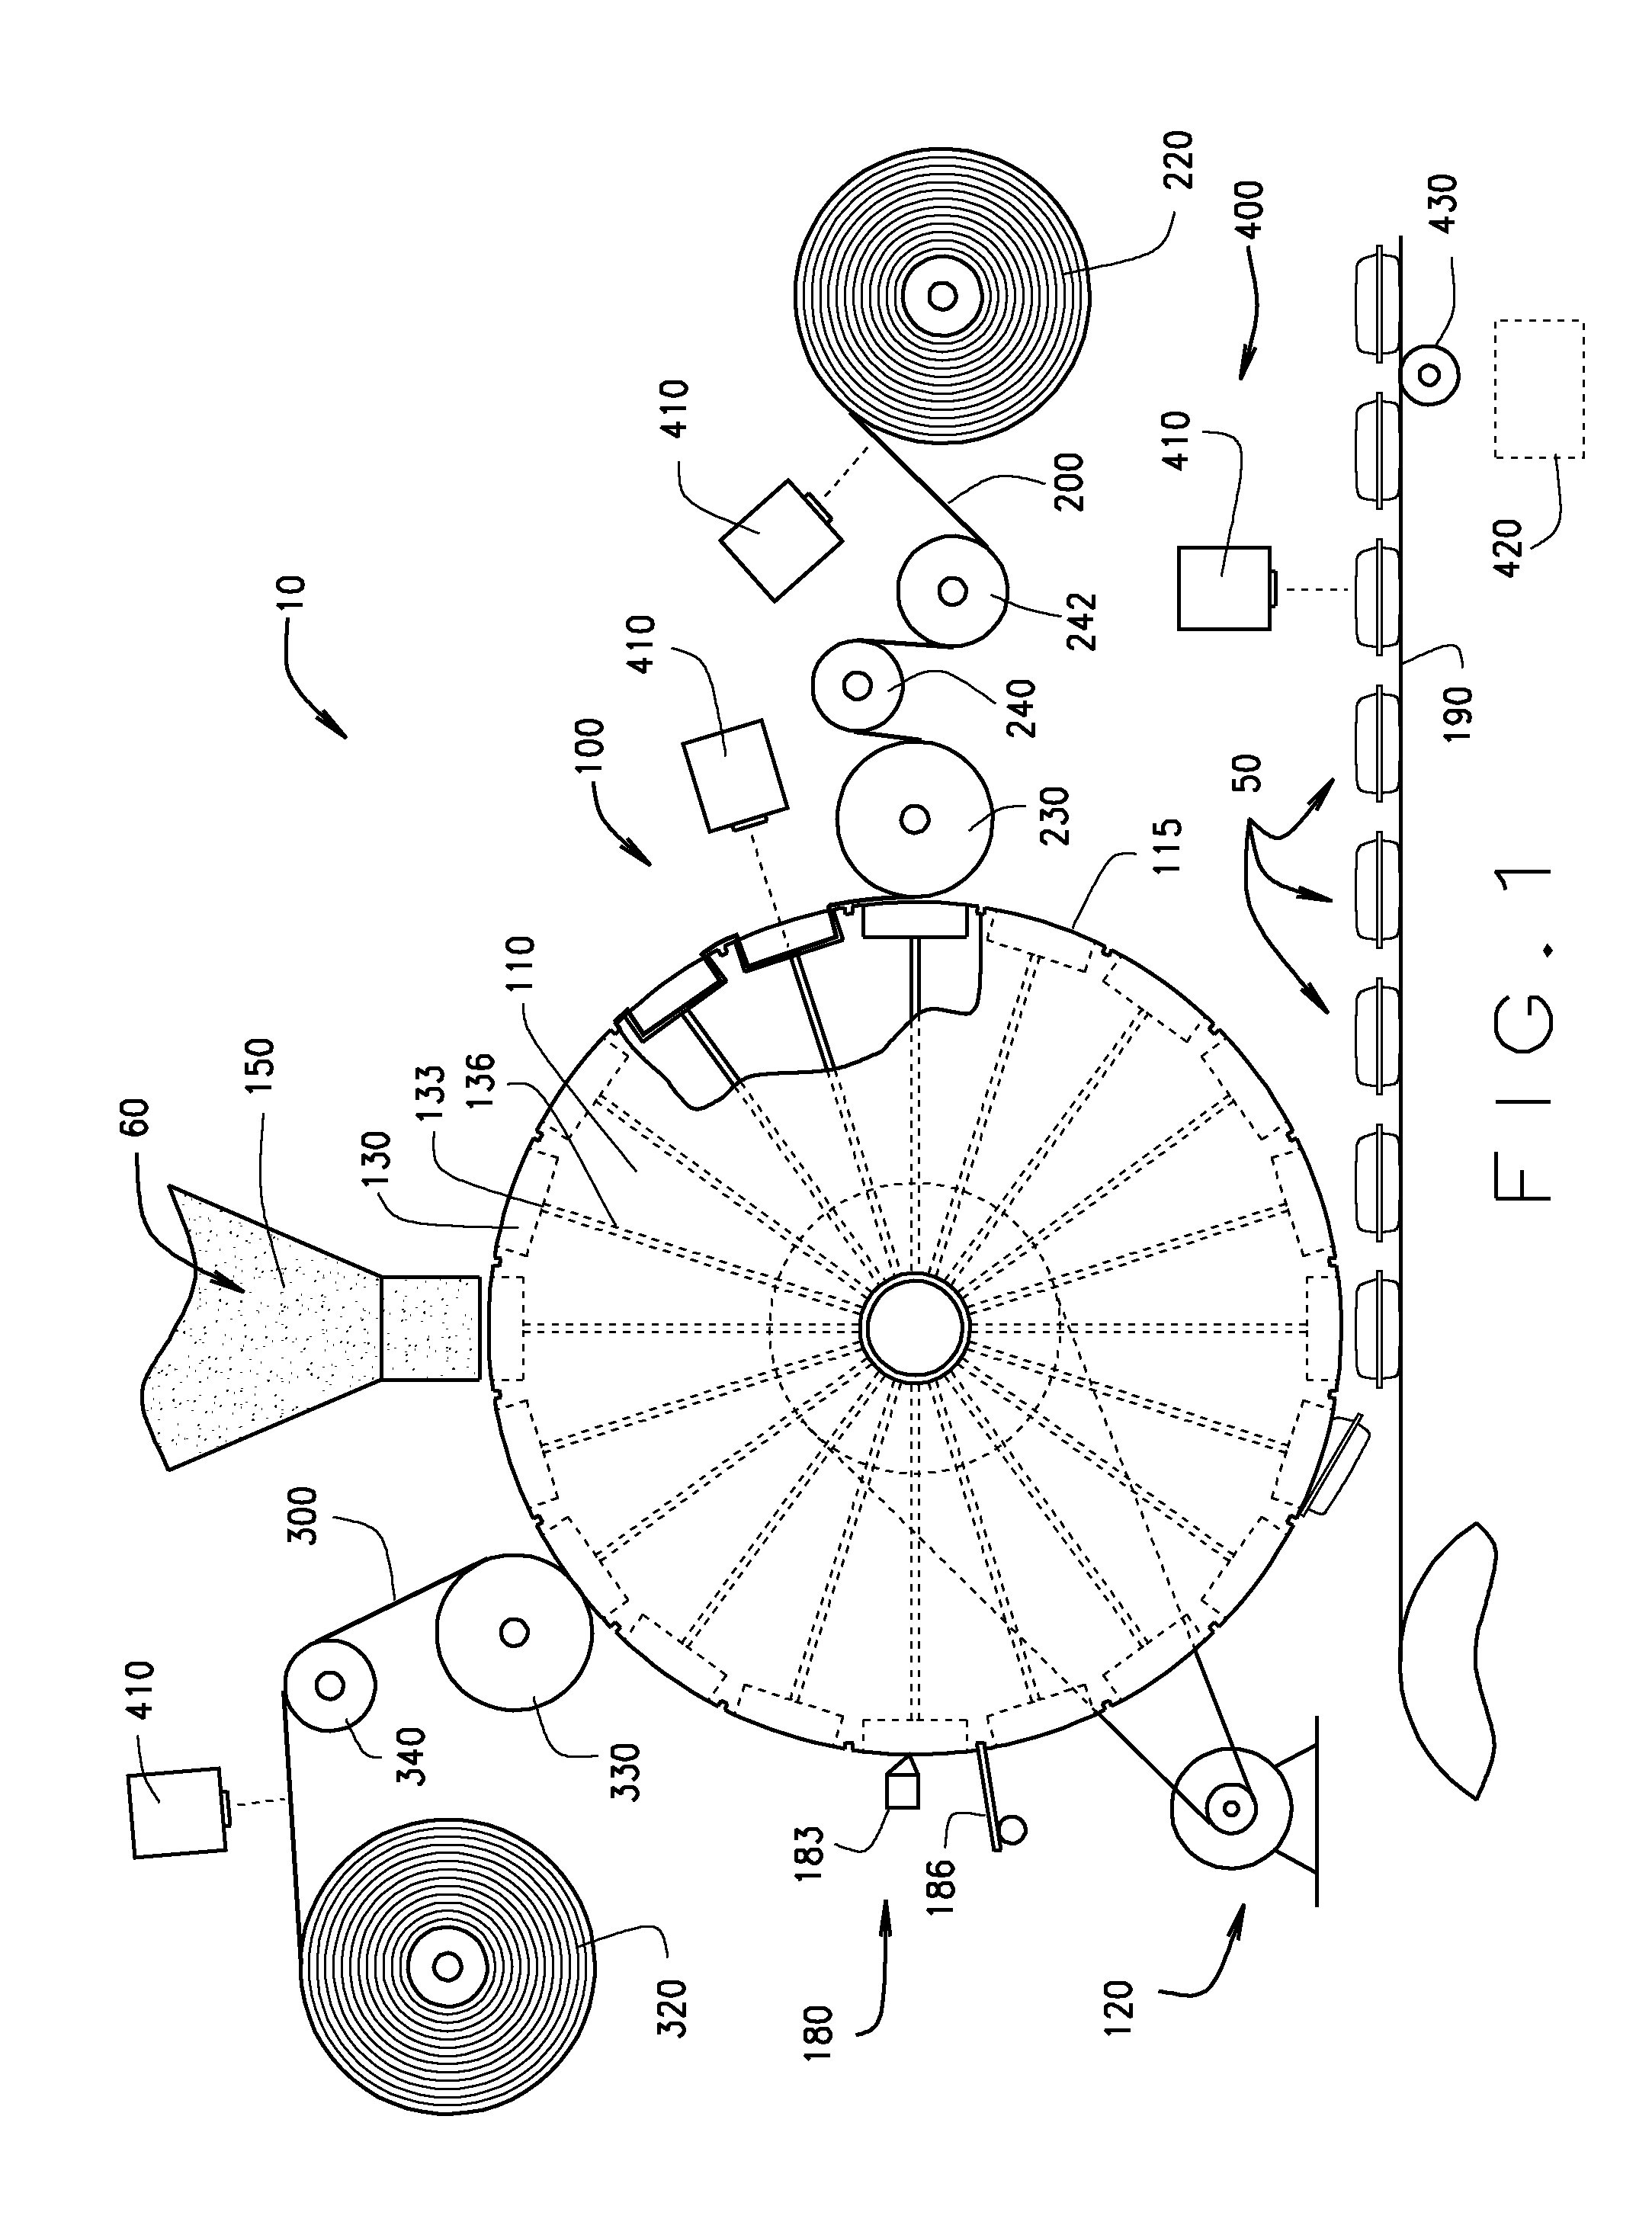 Systems and methods for forming openings in water soluble packets